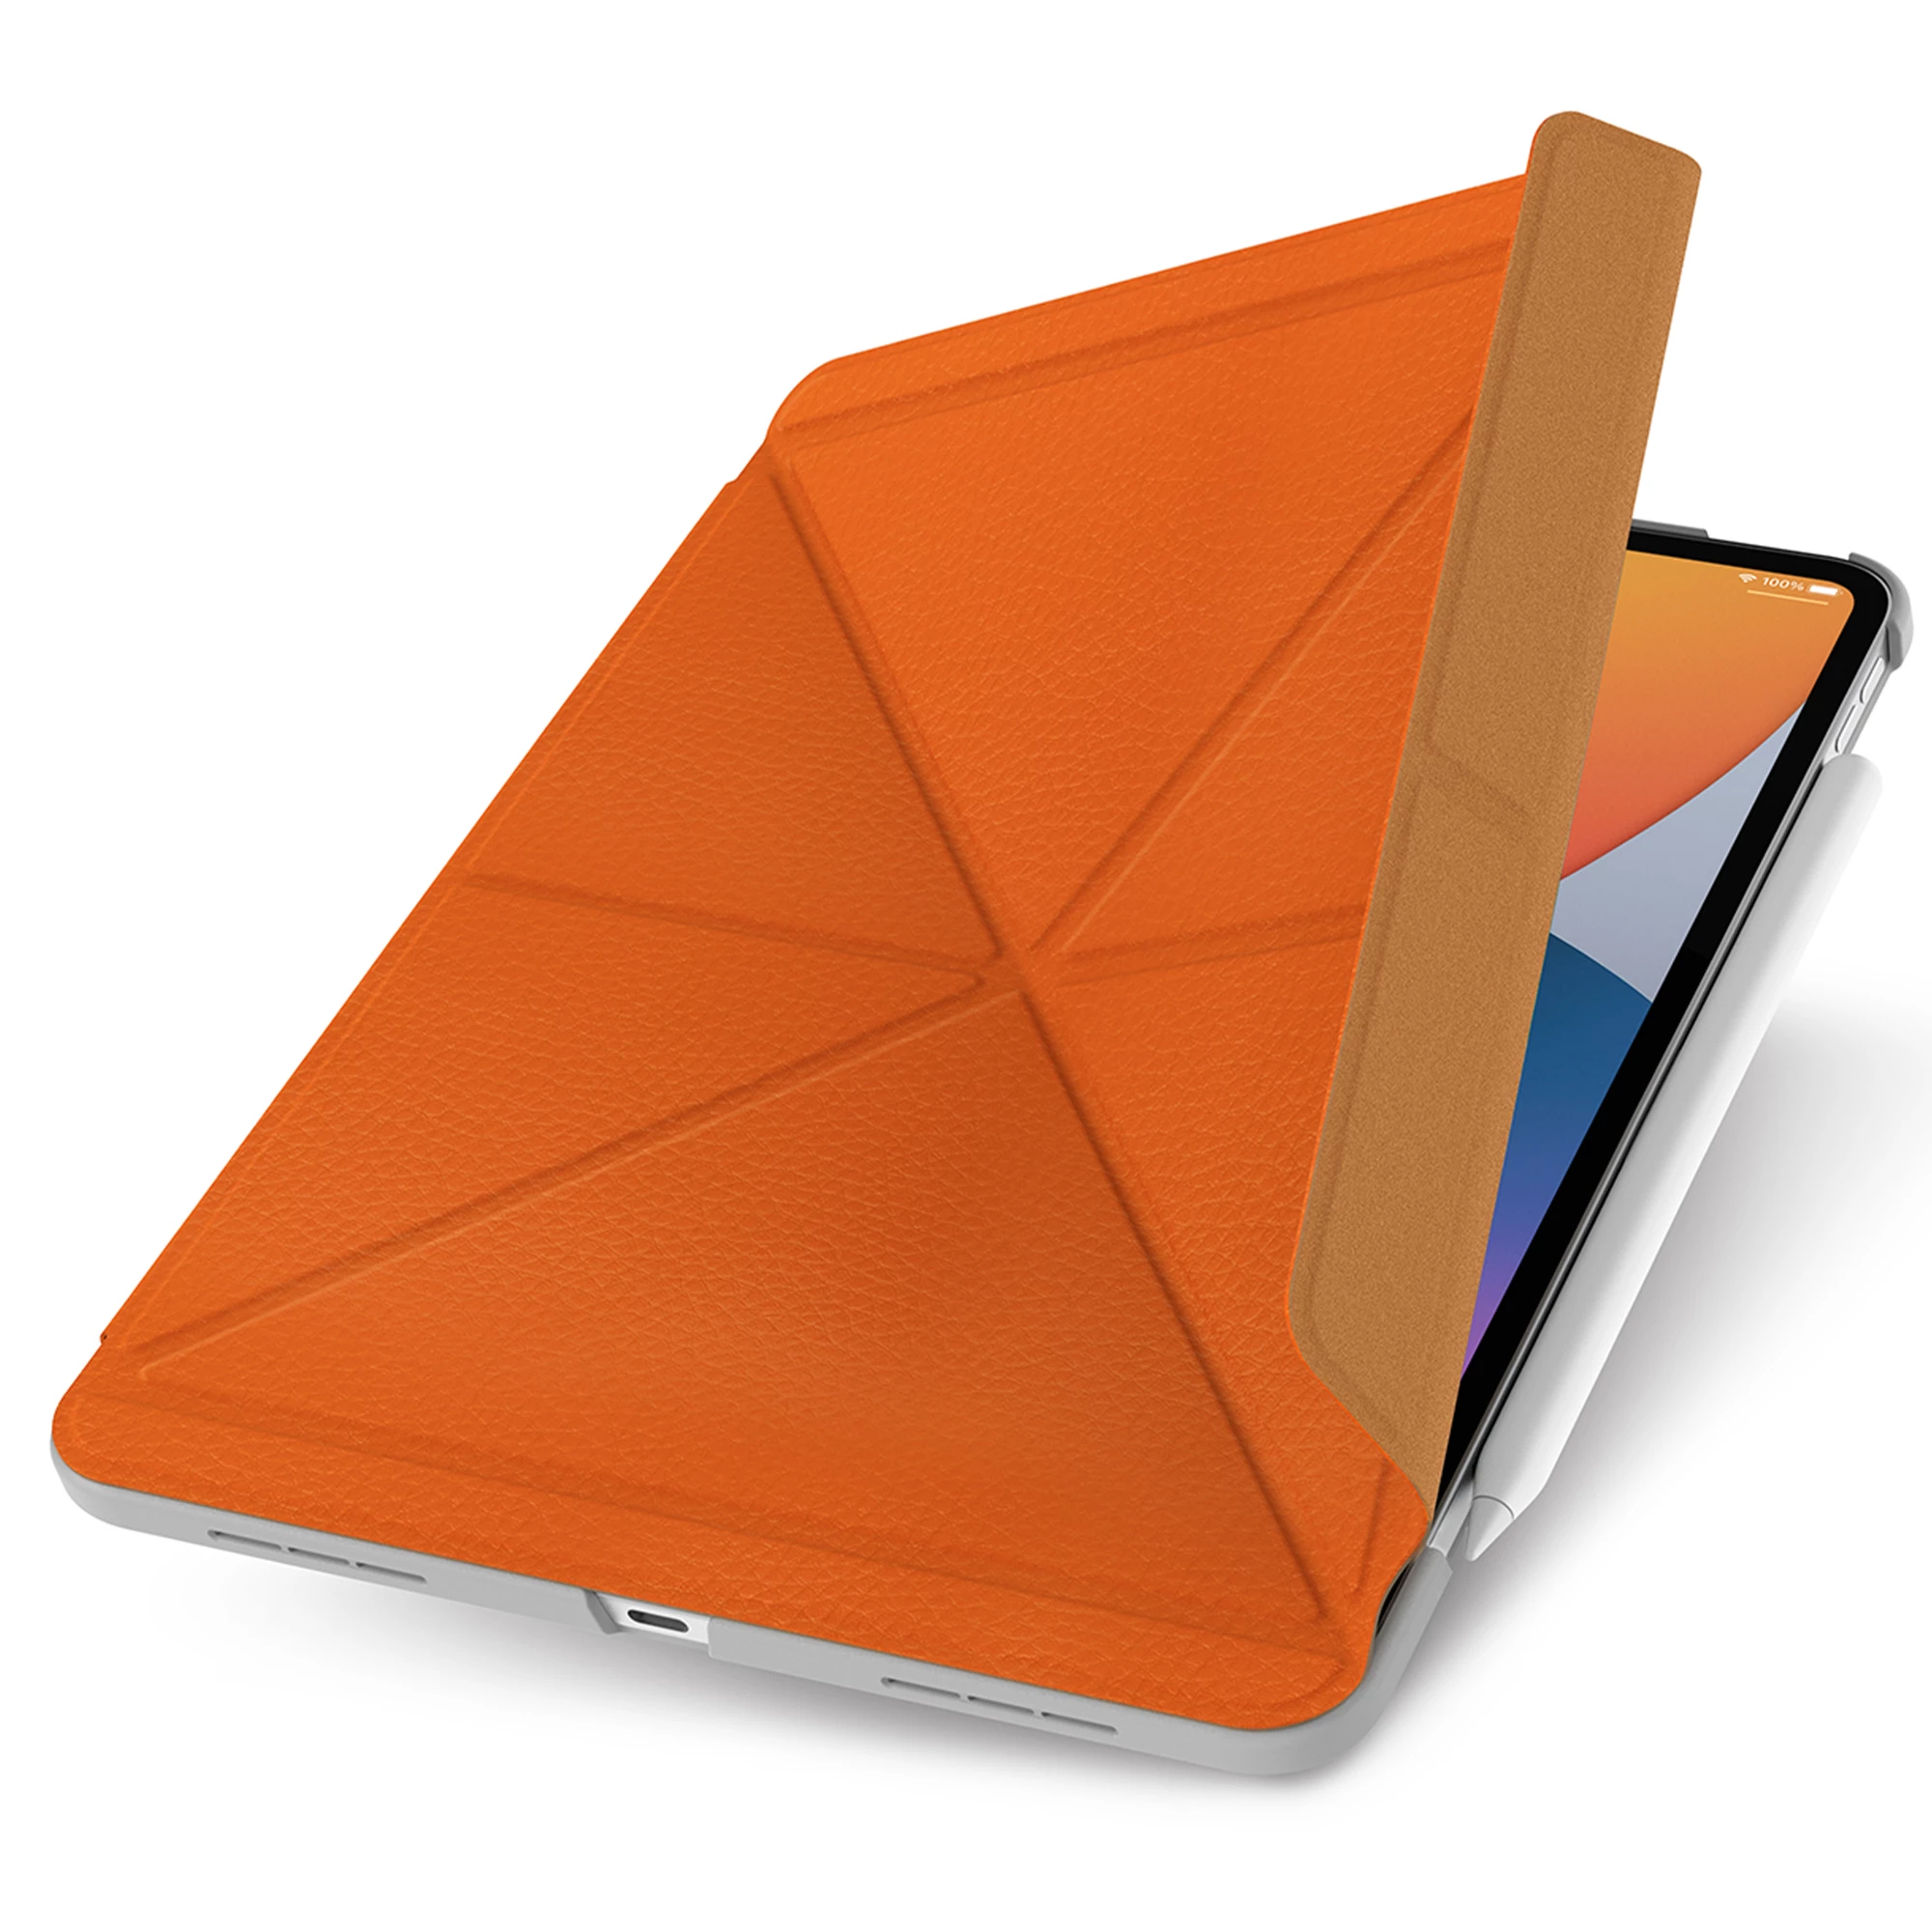 Moshi VersaCover Case with Folding Cover Sienna Orange for iPad Air 10.9" (5th/4th Gen) (99MO056812)